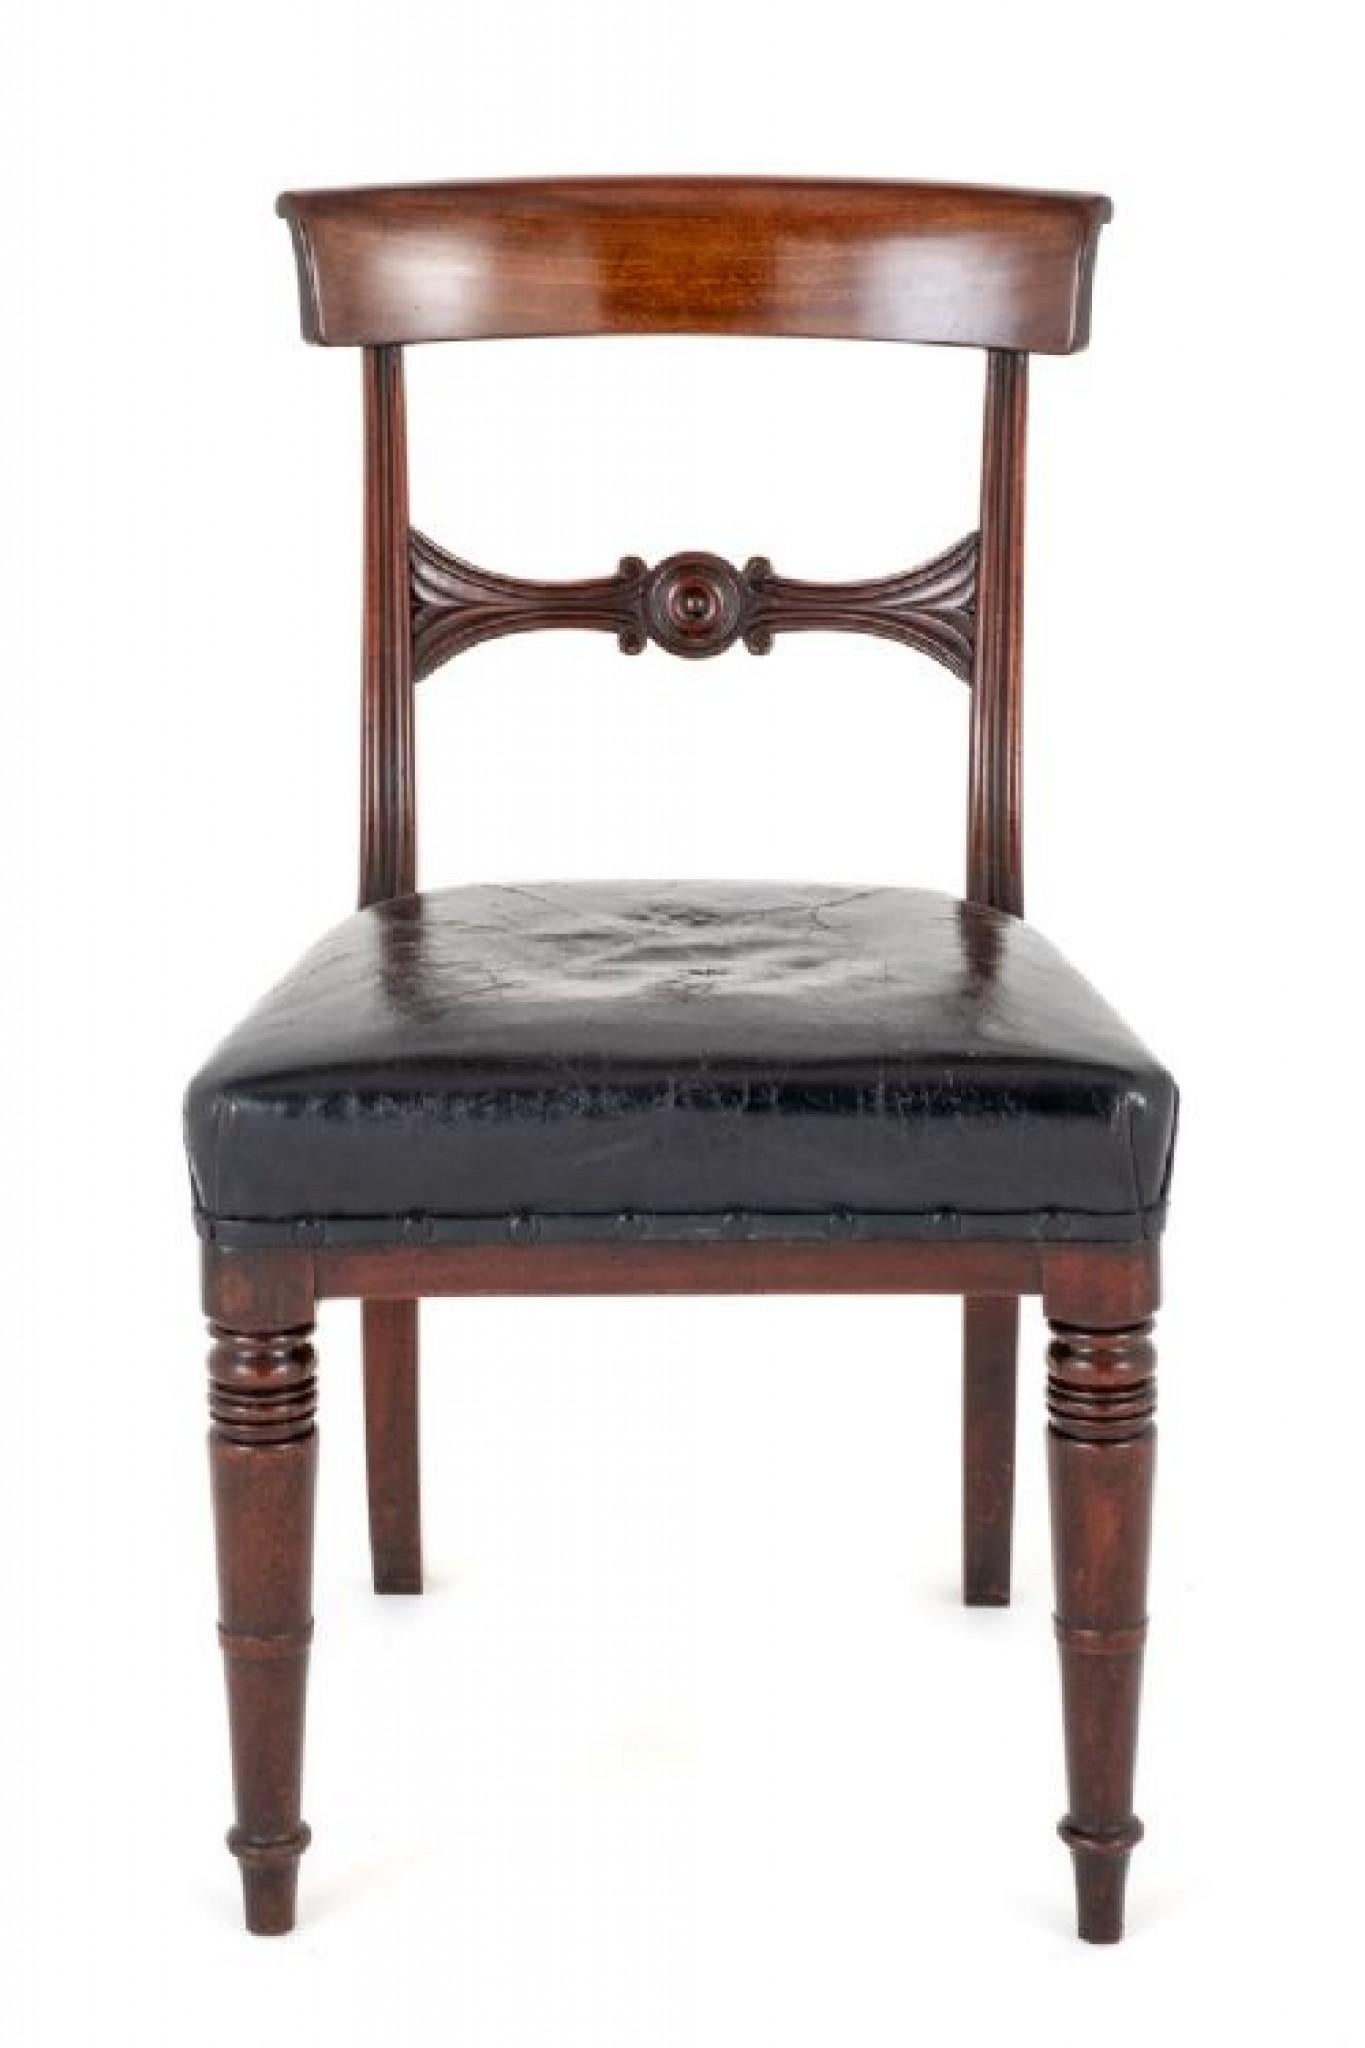 Set of 6 Regency Mahogany Dining Chairs.
Period Regency
The Chairs are Raised Upon Ring Turned Front Legs with Swept Back Legs.
The Chairs feature Leather Stuff Over Seats.
The Backs of the Chairs Having Fluted Uprights and a Carved and Turned